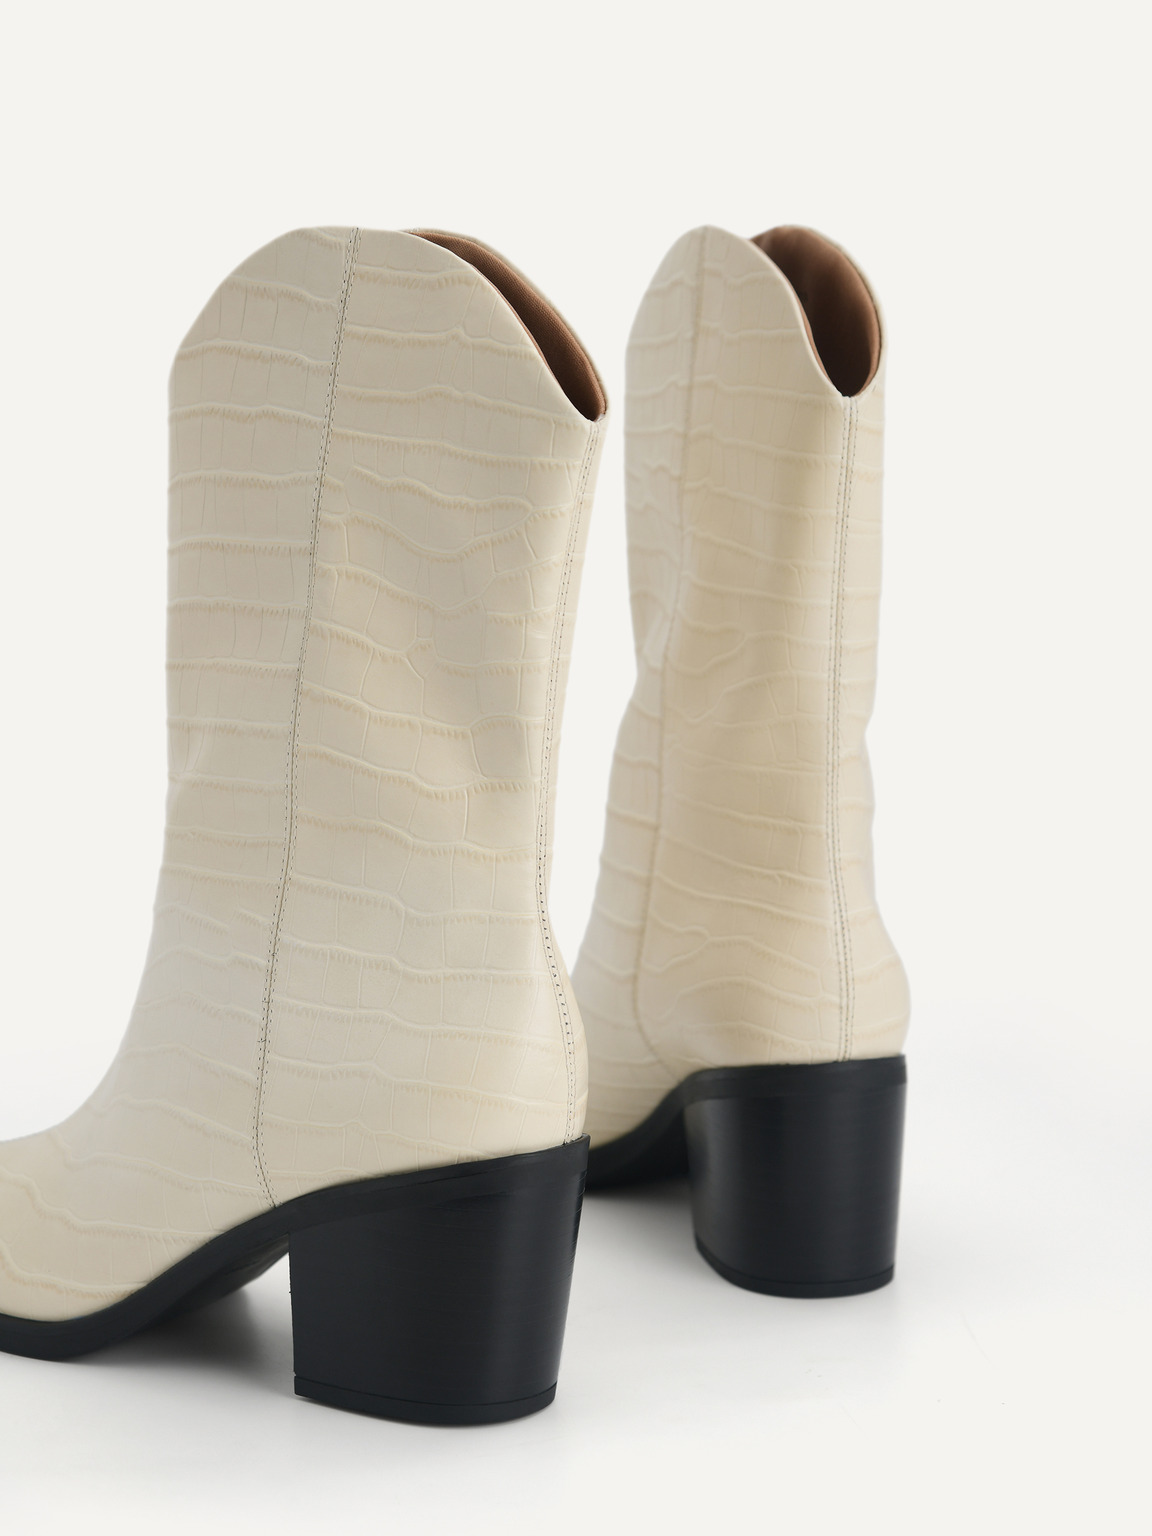 Croc-Effect Leather Ankle Boots, Light Yellow